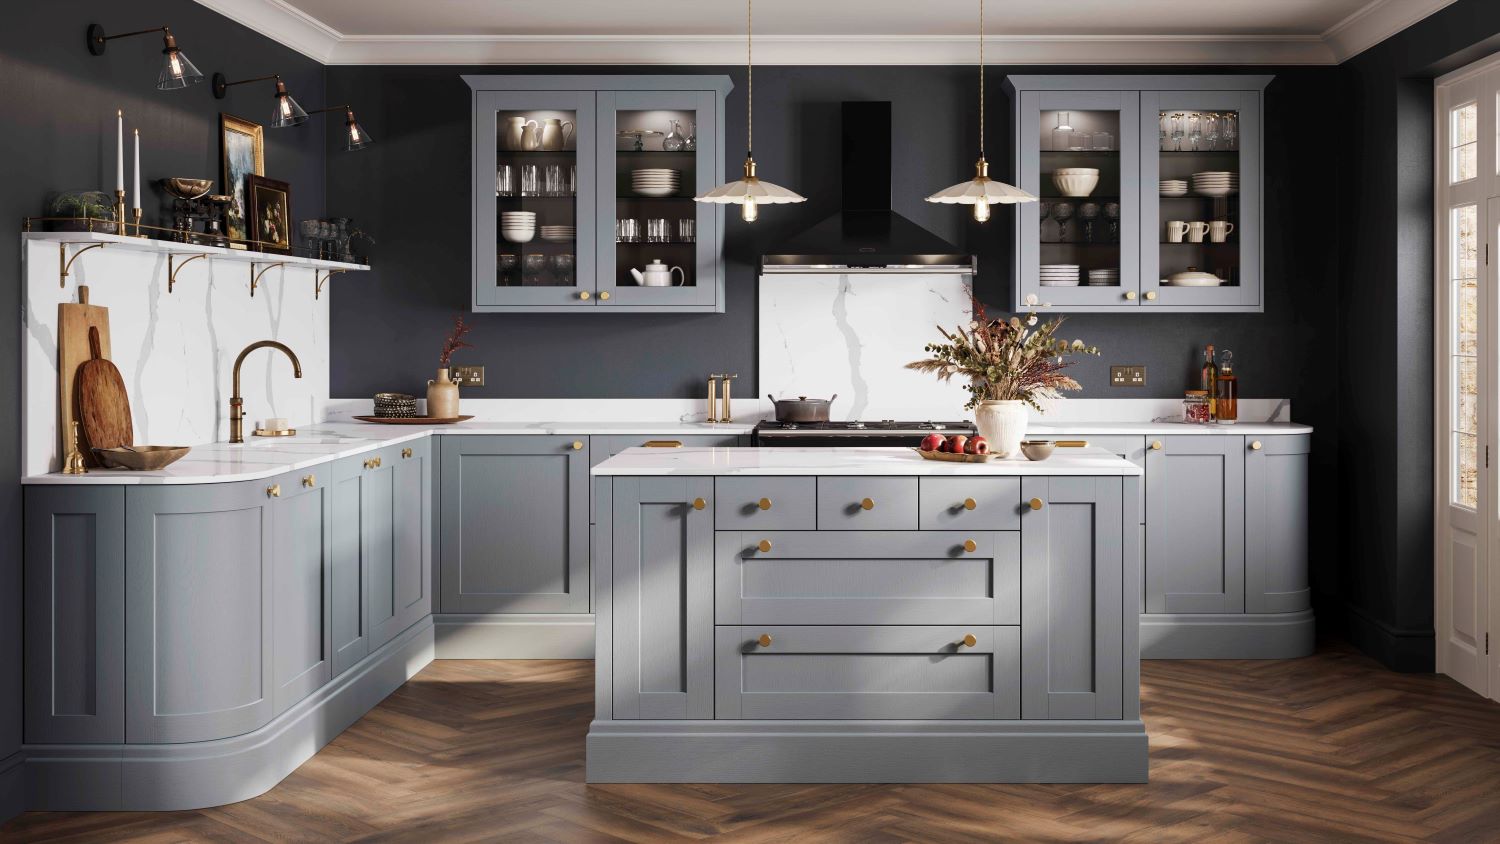 Howdens launches two new kitchen ranges